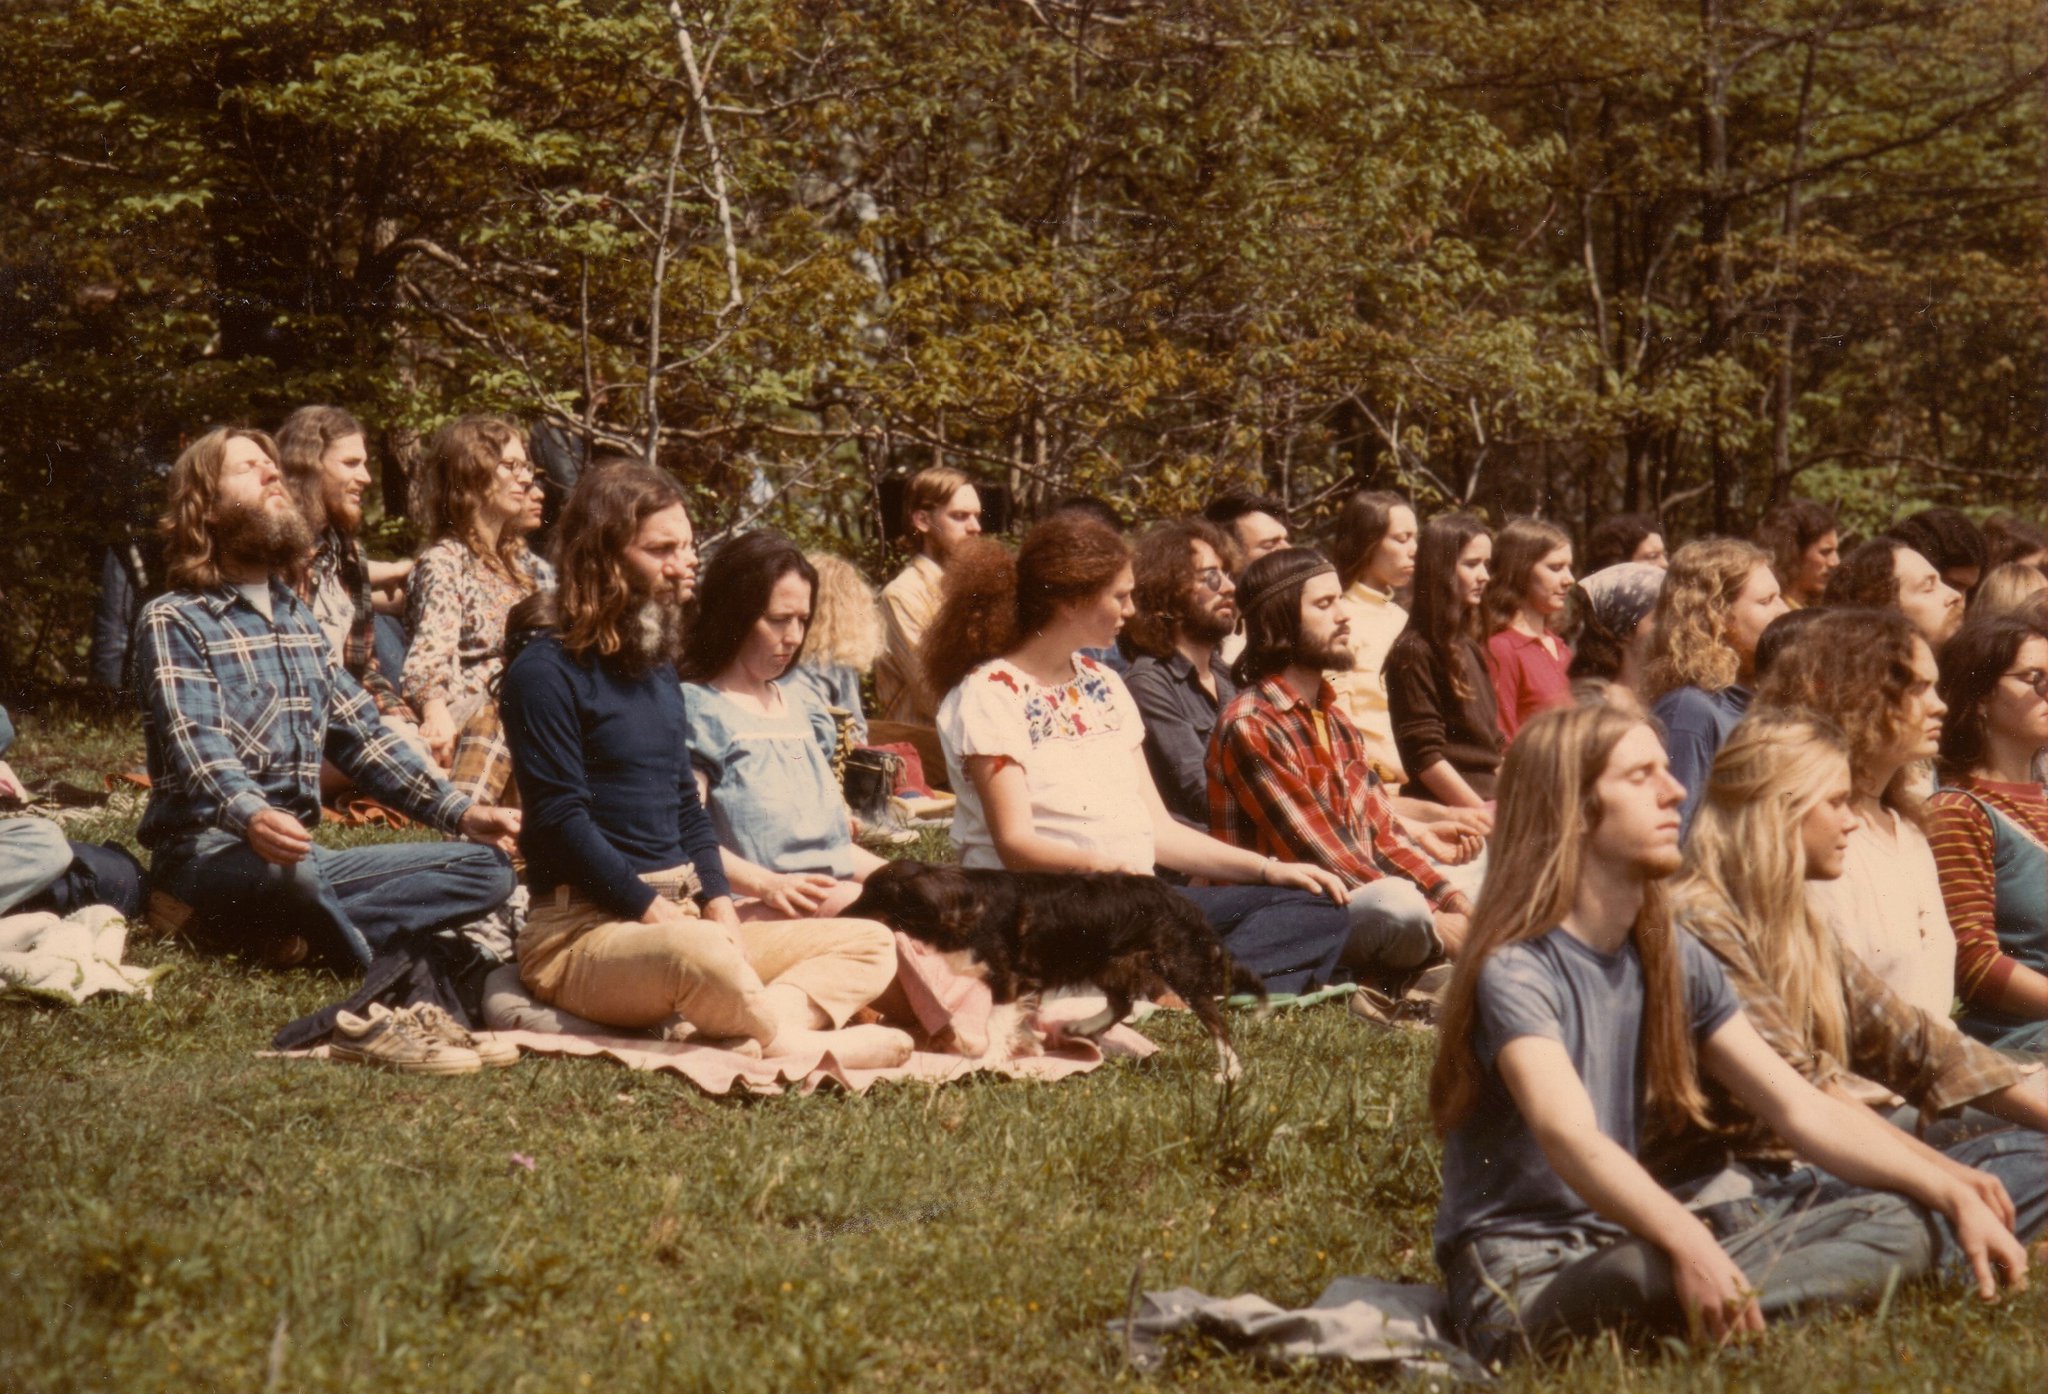 The hippie and the liberalism.